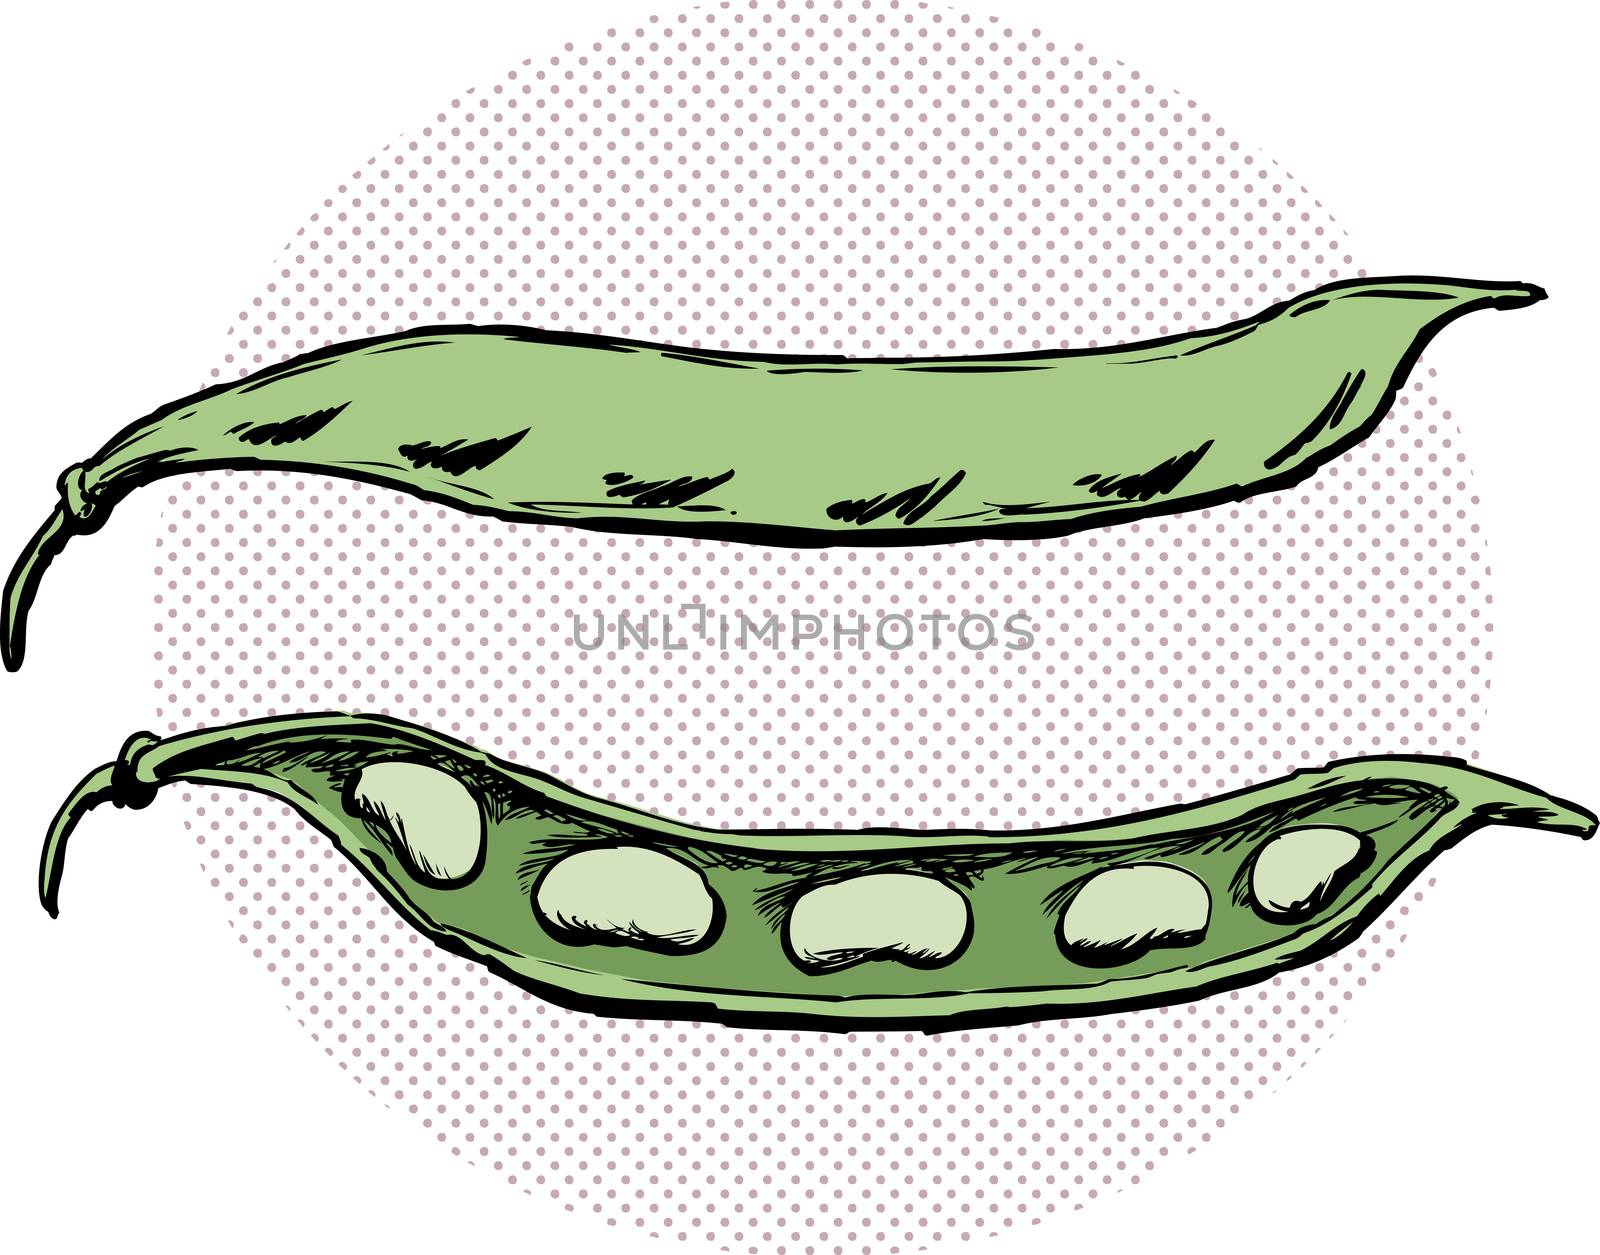 Split and whole bean pods illustration by TheBlackRhino